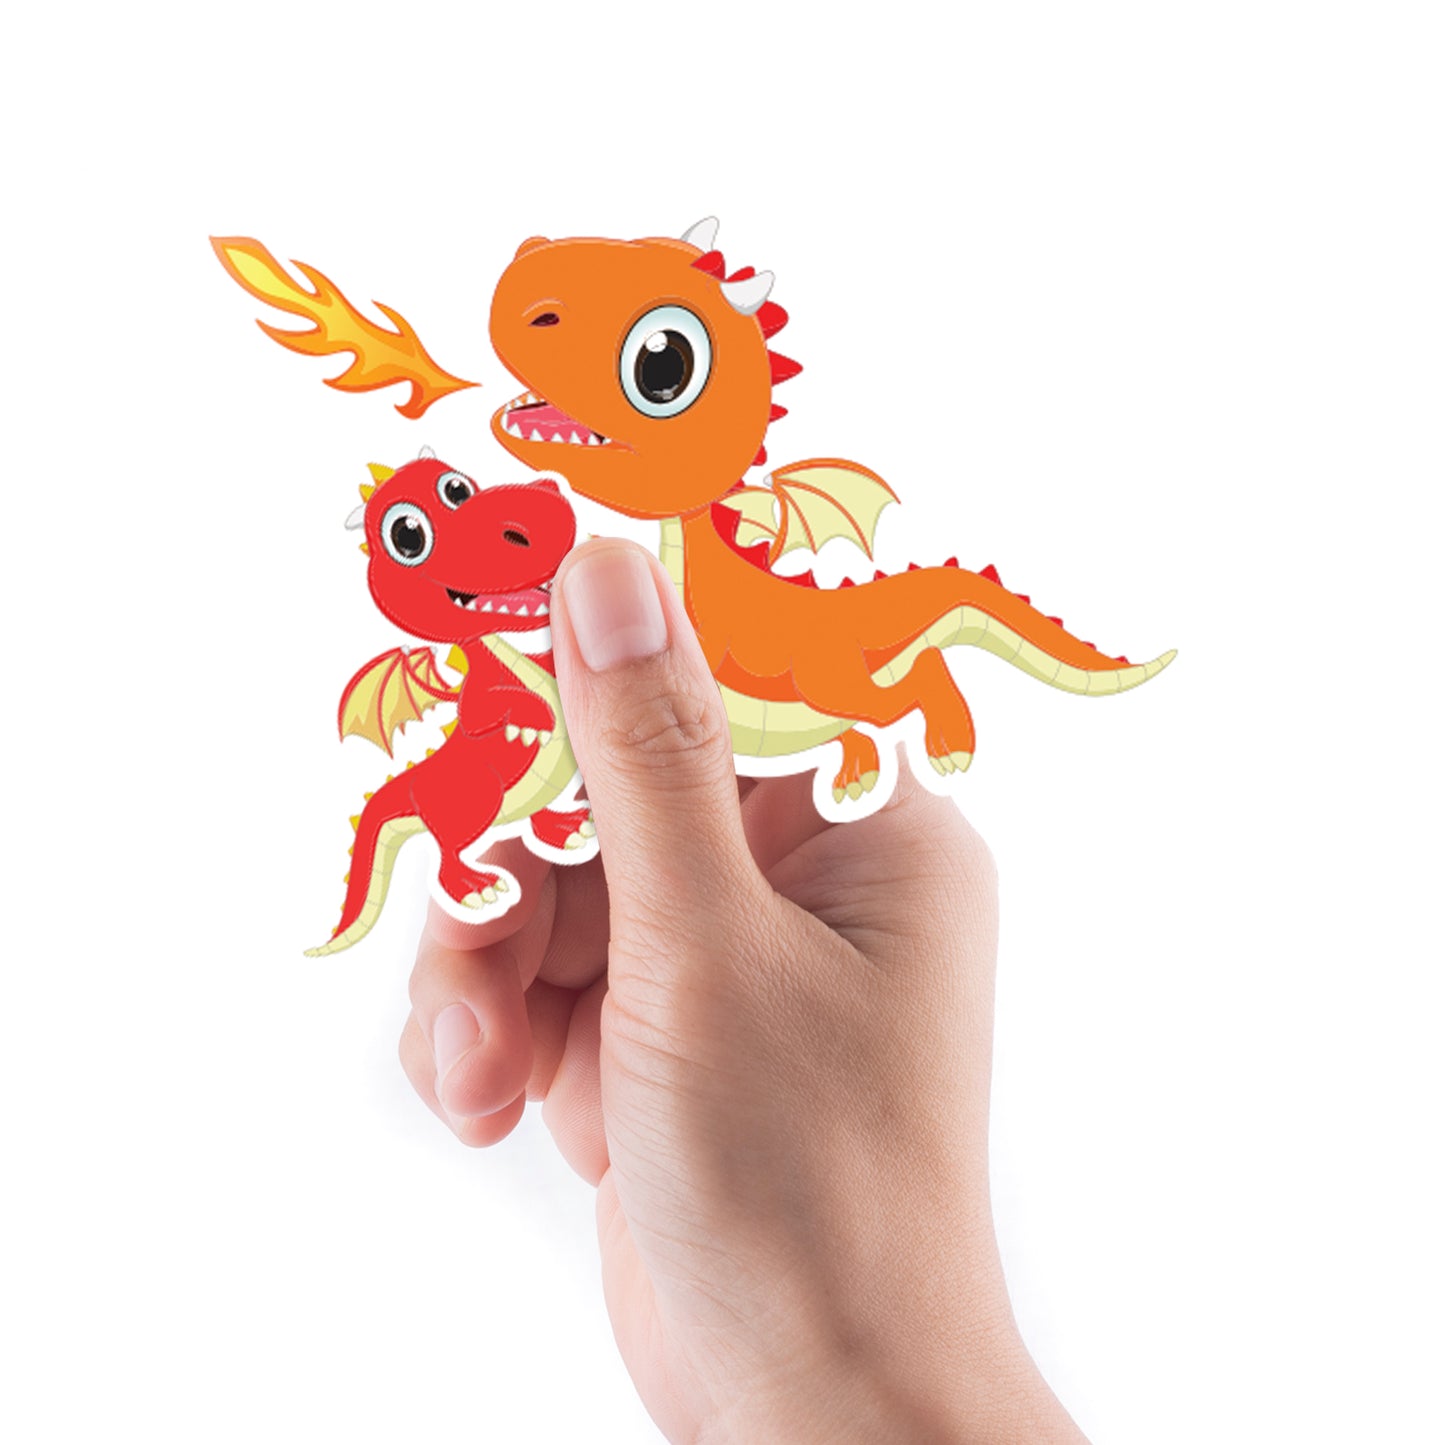 Sheet of 5 -Mythical Creatures: Dragons Minis        -   Removable    Adhesive Decal